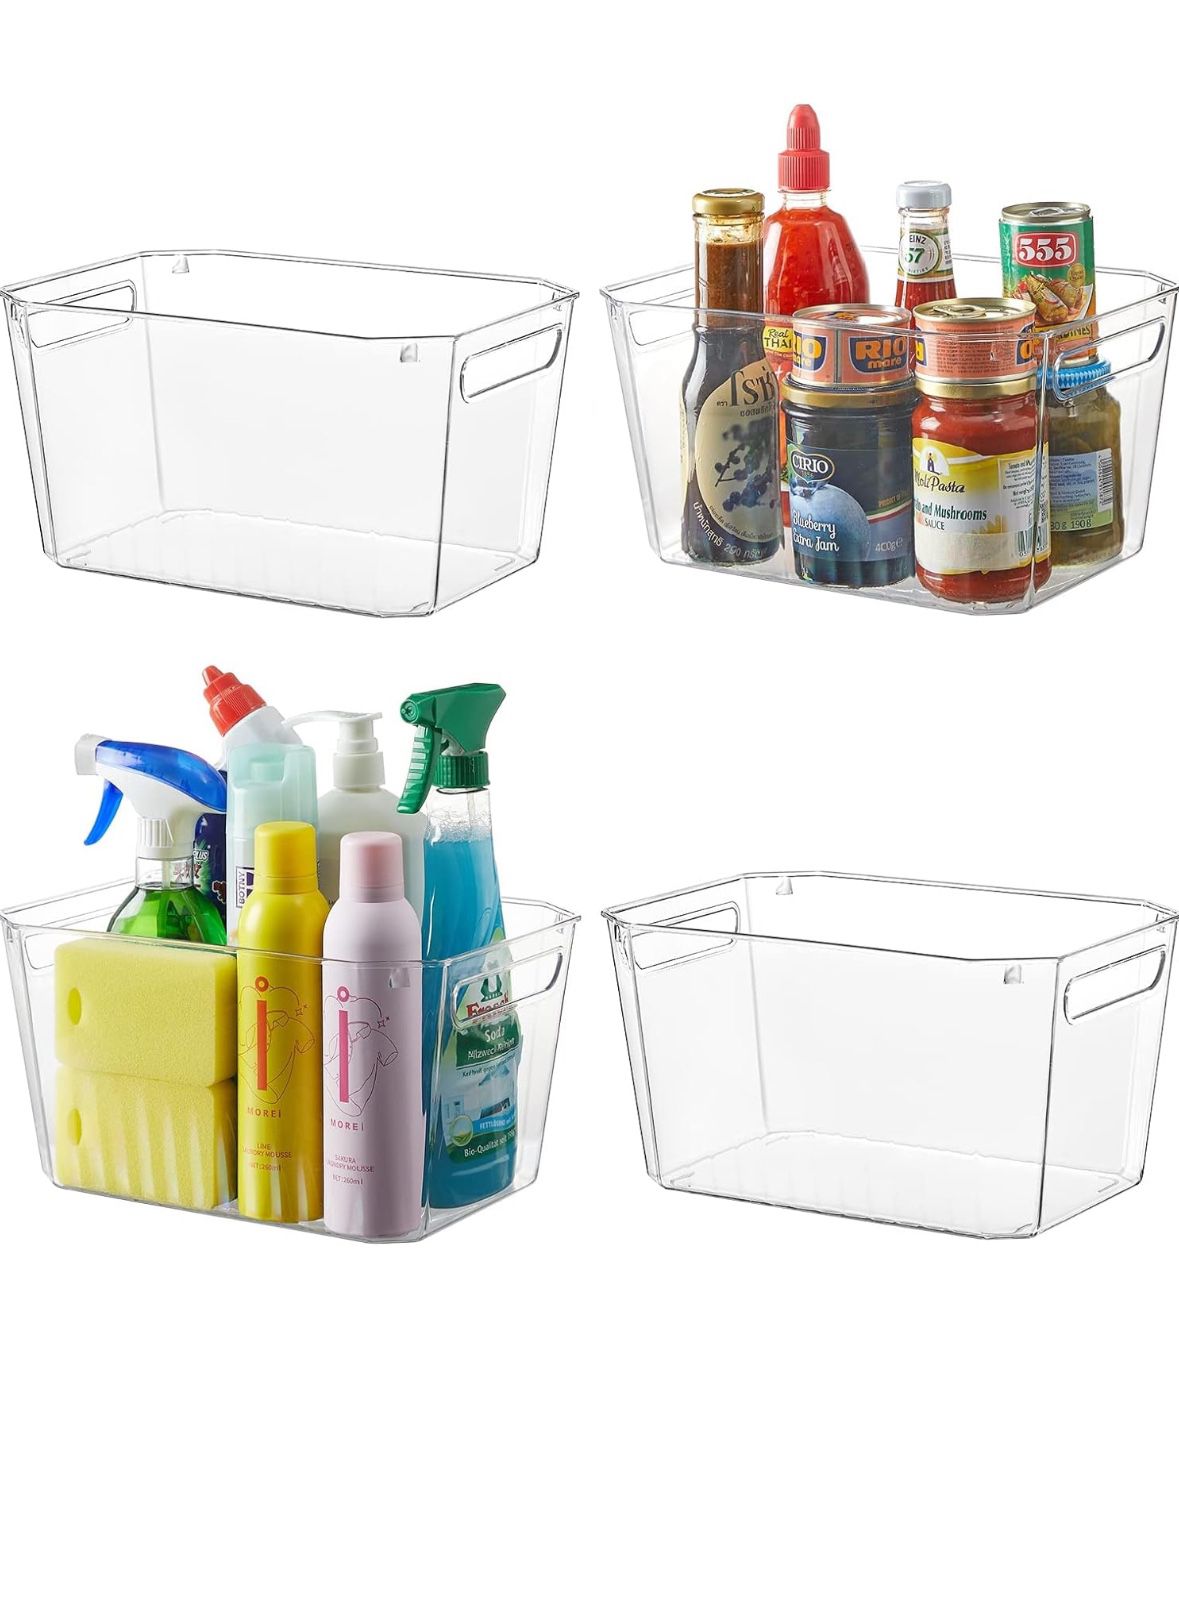 4pcs Large Storage Organizer Bins for Pantry Kitchen, Clear Plastic Storage Basket Set with Handle for Laundryroom Bathroom Cabinet Countertop Organiz